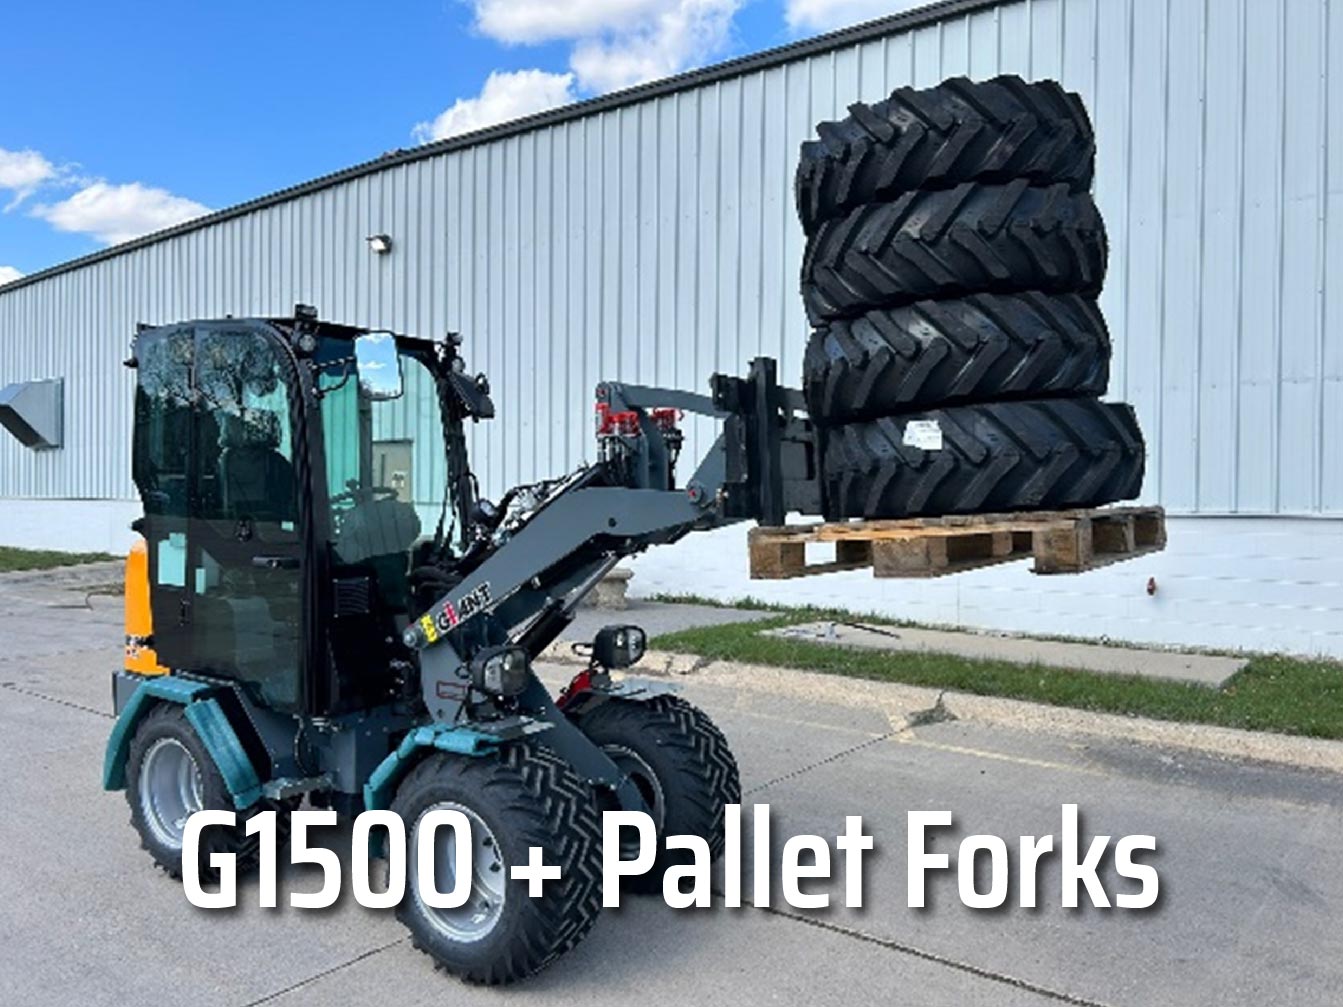 G1500+Pallet Forks Lifting a pallet of Tractor Tires Closed Cabin, next to warehouse